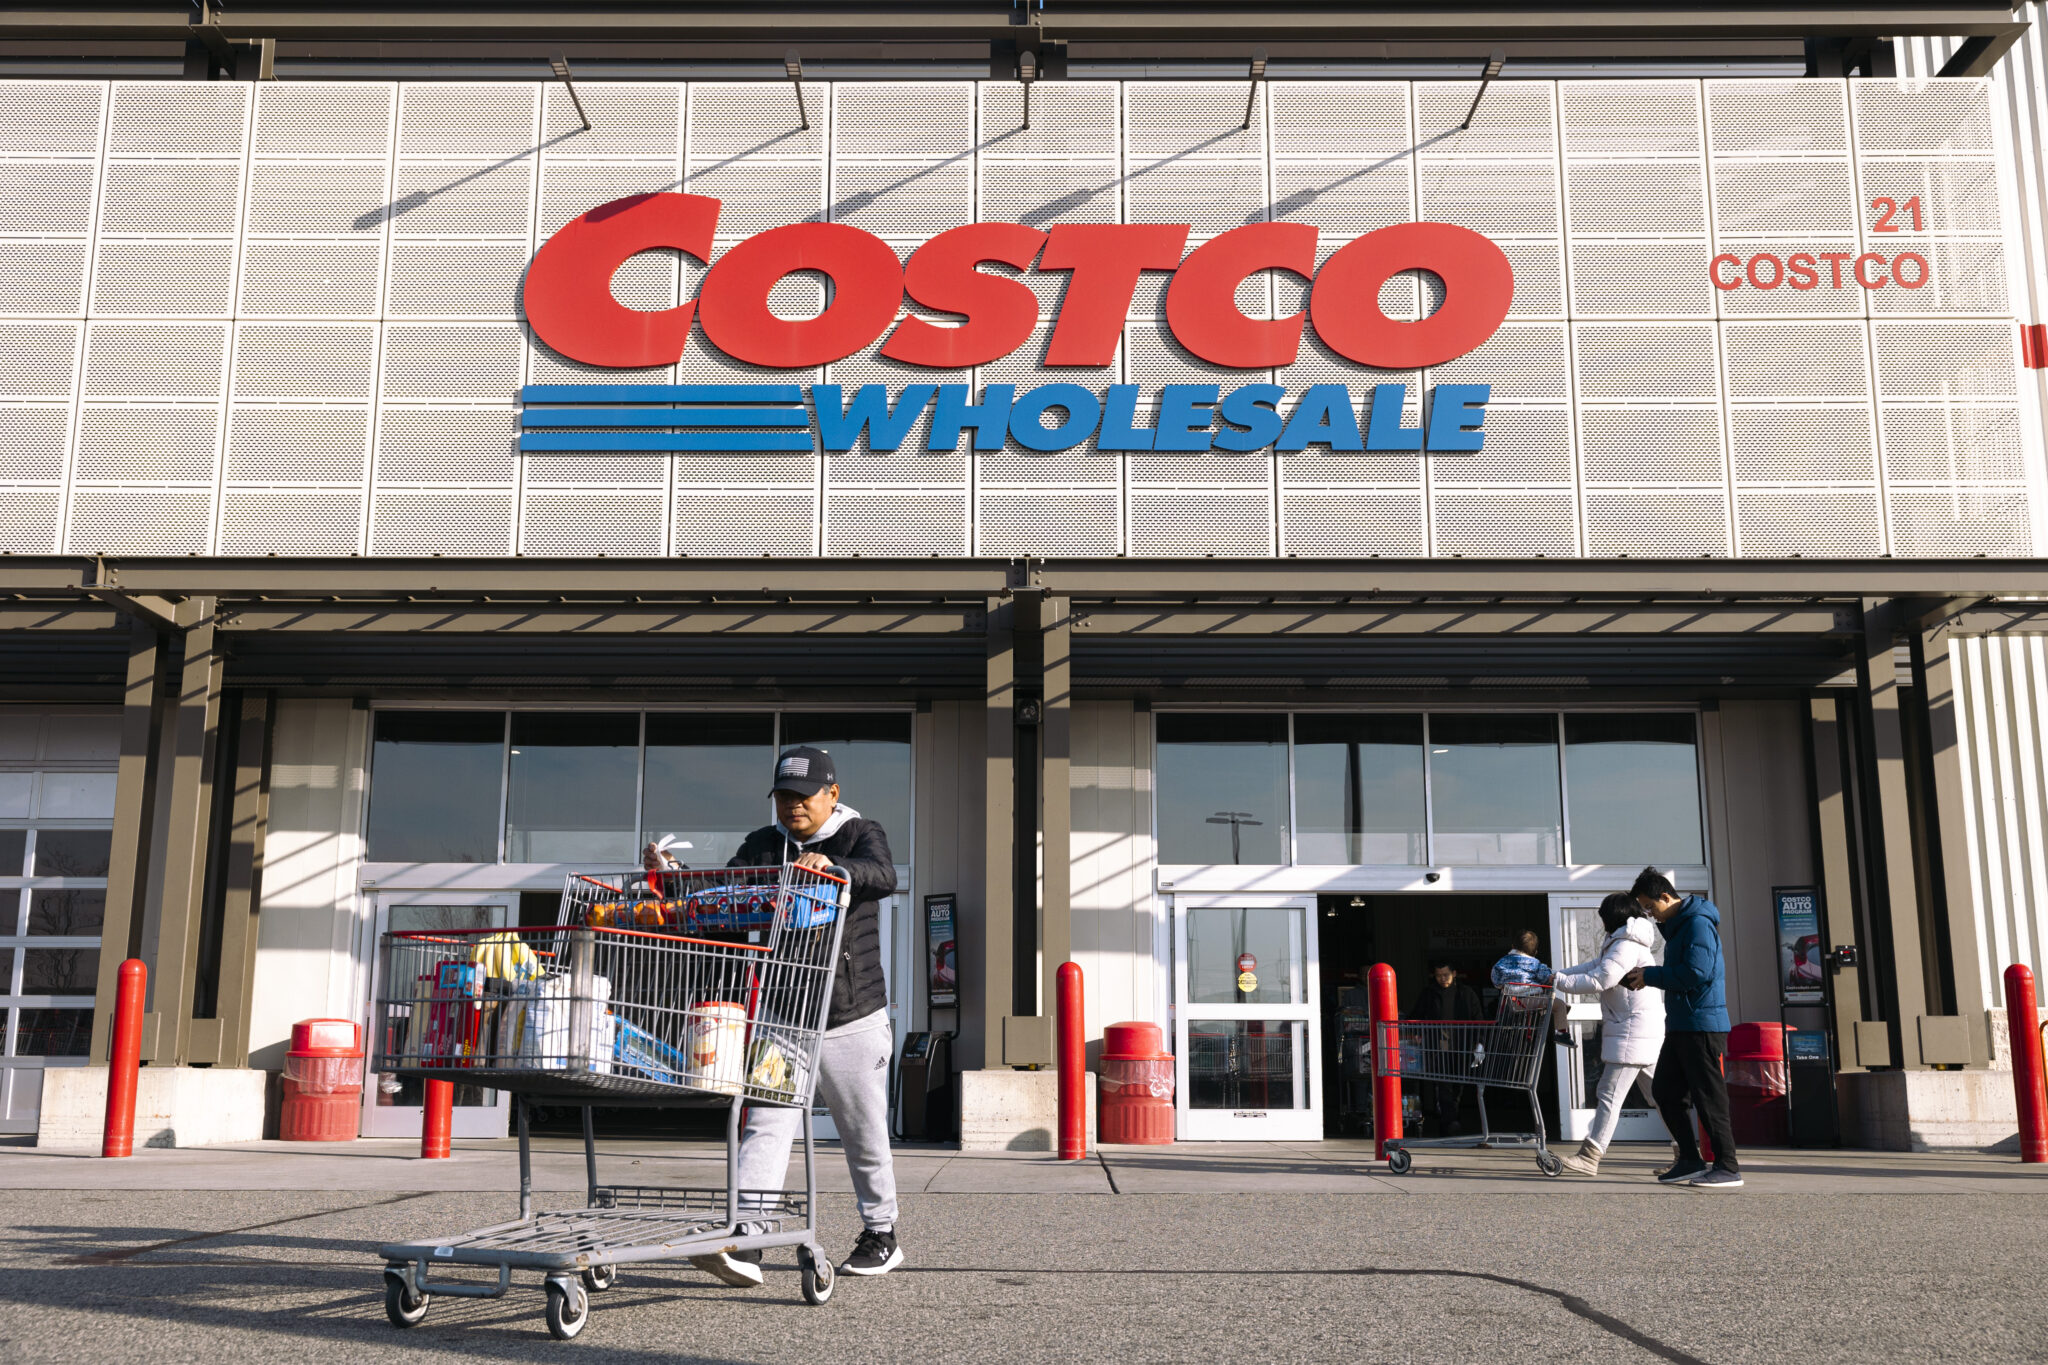 Costco shopper warning as thieves target them and ‘won’t stop until your account is drained dry’ – what to watch for